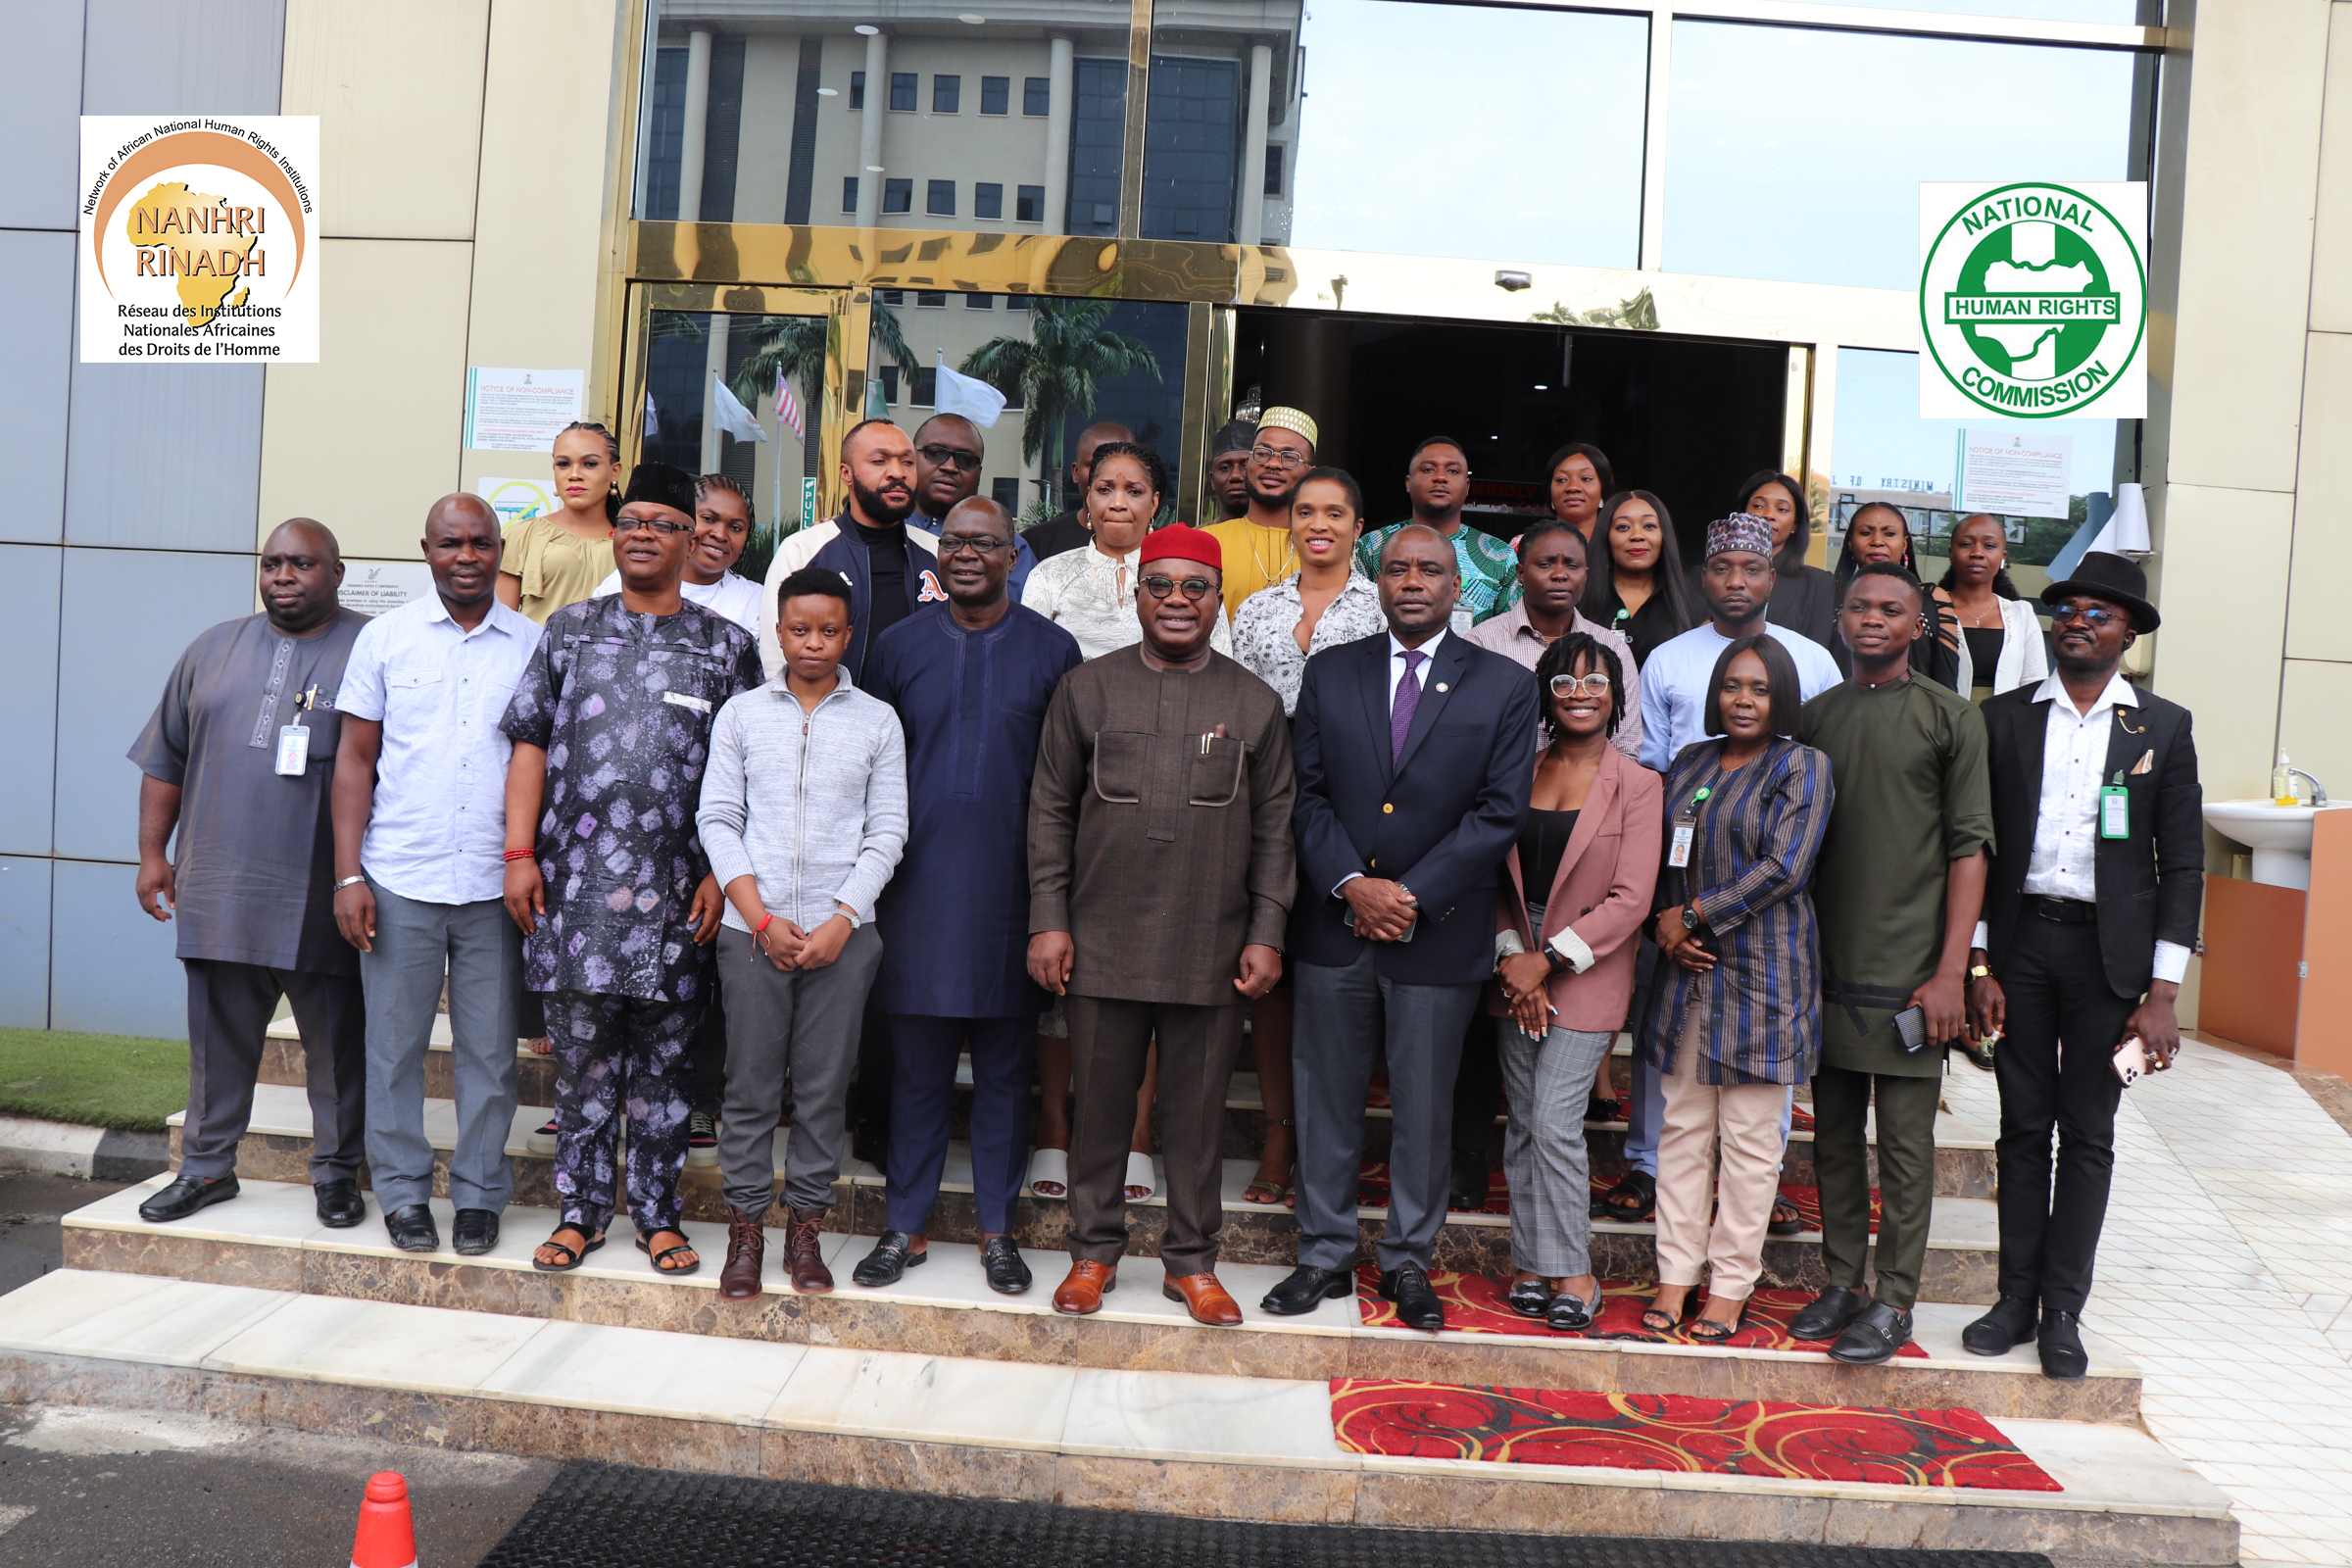 NANHRI and the NHRC Nigeria jointly host an incountry workshop on SOGIESC in Abuja, Nigeria. The workshop seeks to increase capacity of staff of the NHRC-Nigeria and enhance collaboration with LBTIQ+ CSOs. Photo: Secretariat.